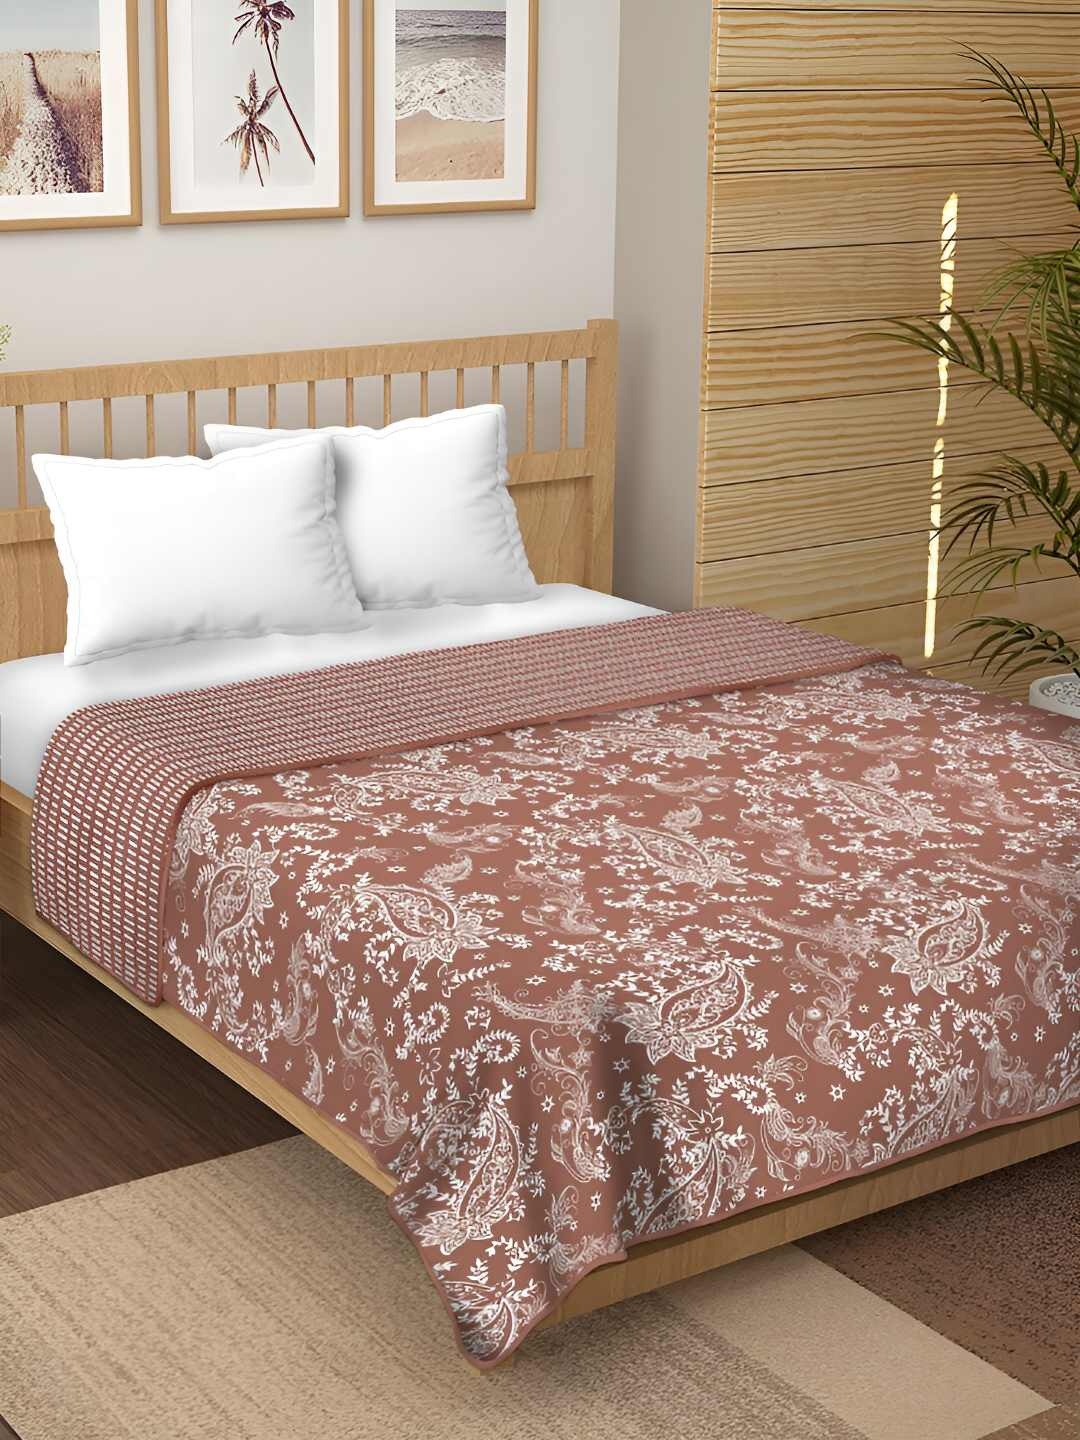 

tundwal's Brown & White Floral AC Room Cotton 210 GSM Single Bed Dohar